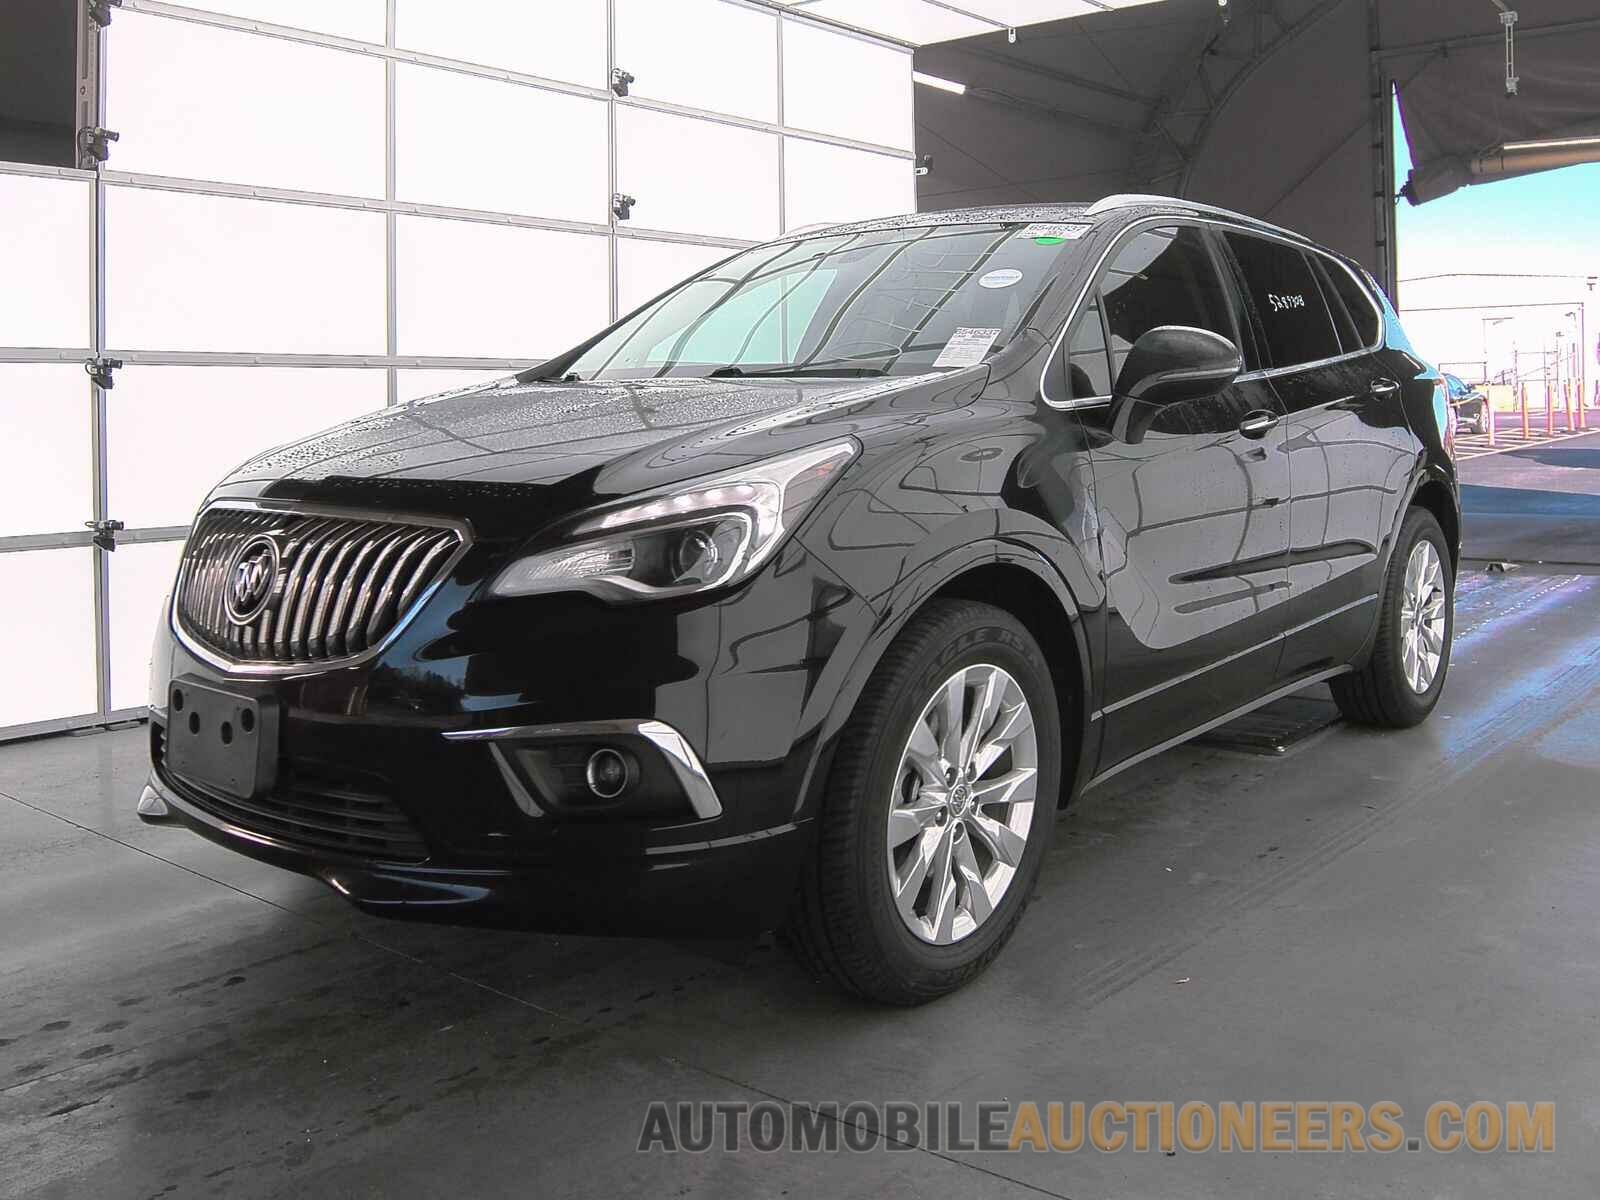 LRBFXBSA1HD077194 Buick Envision 2017